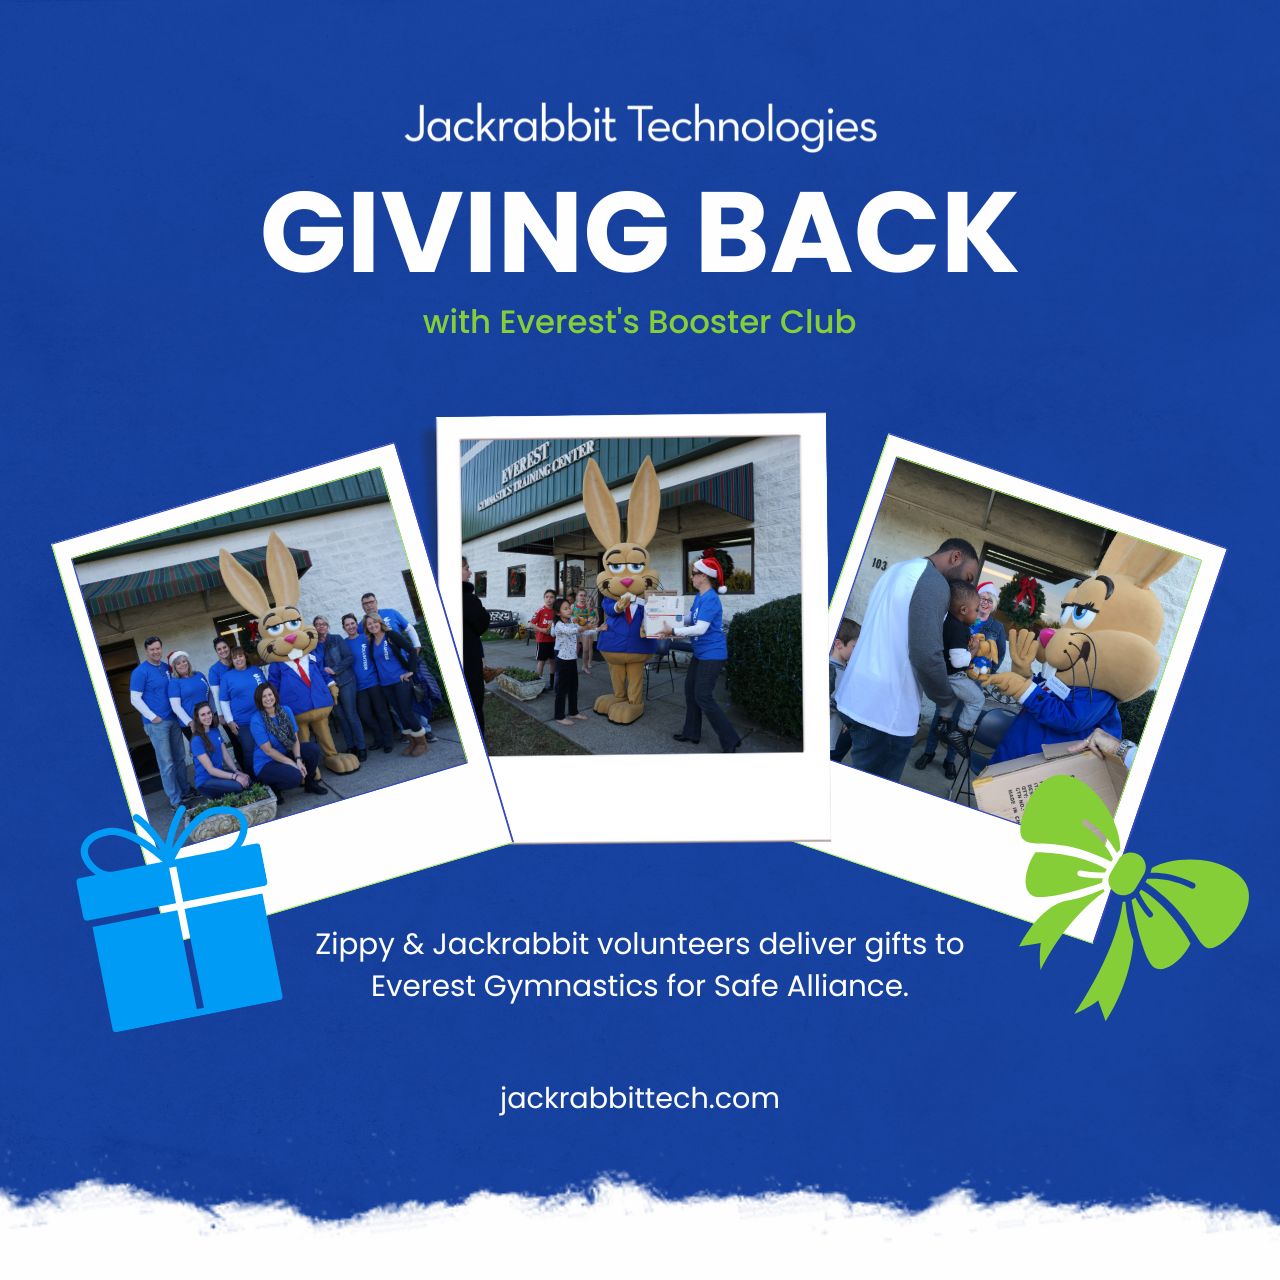 jackrabbit gives back with everest's booster club